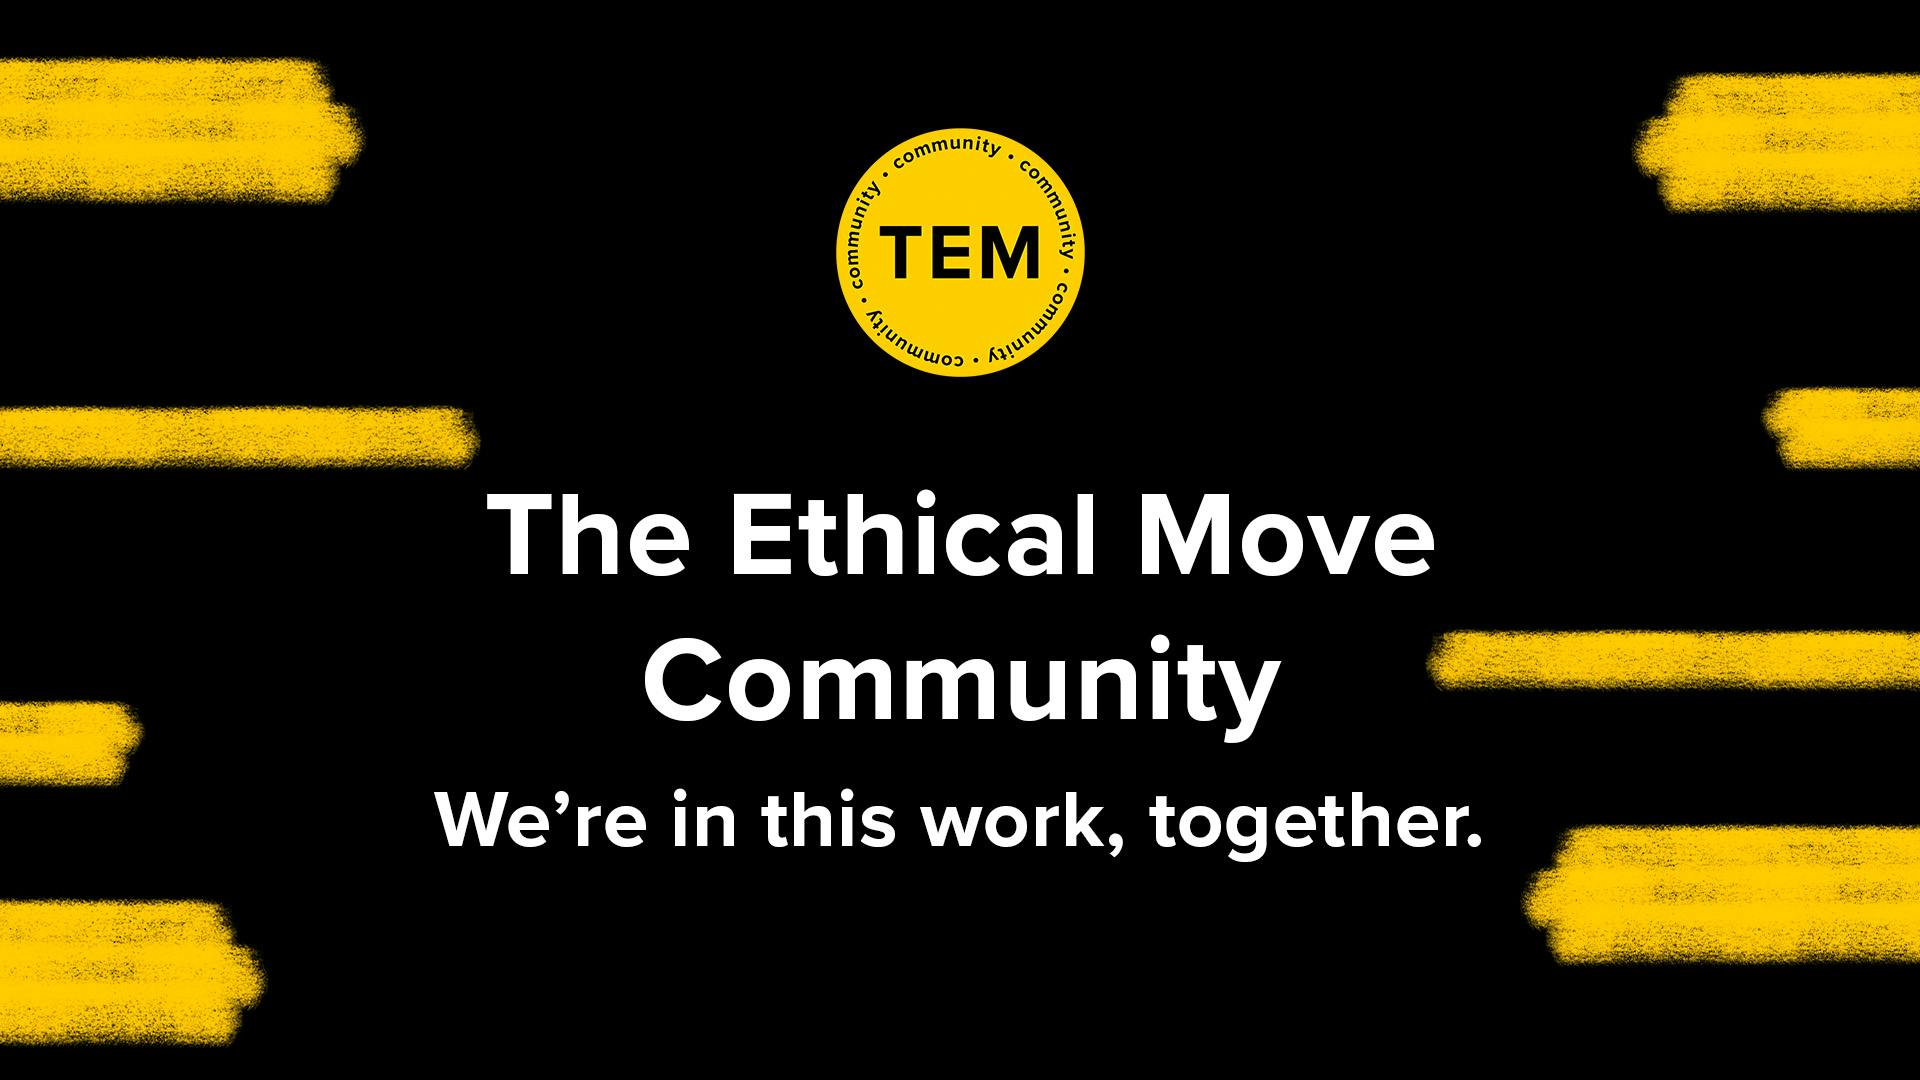 "The Ethical Move Community" with subtitle "We're in this work together" on black background with yellow marker lines and yellow TEMC logo